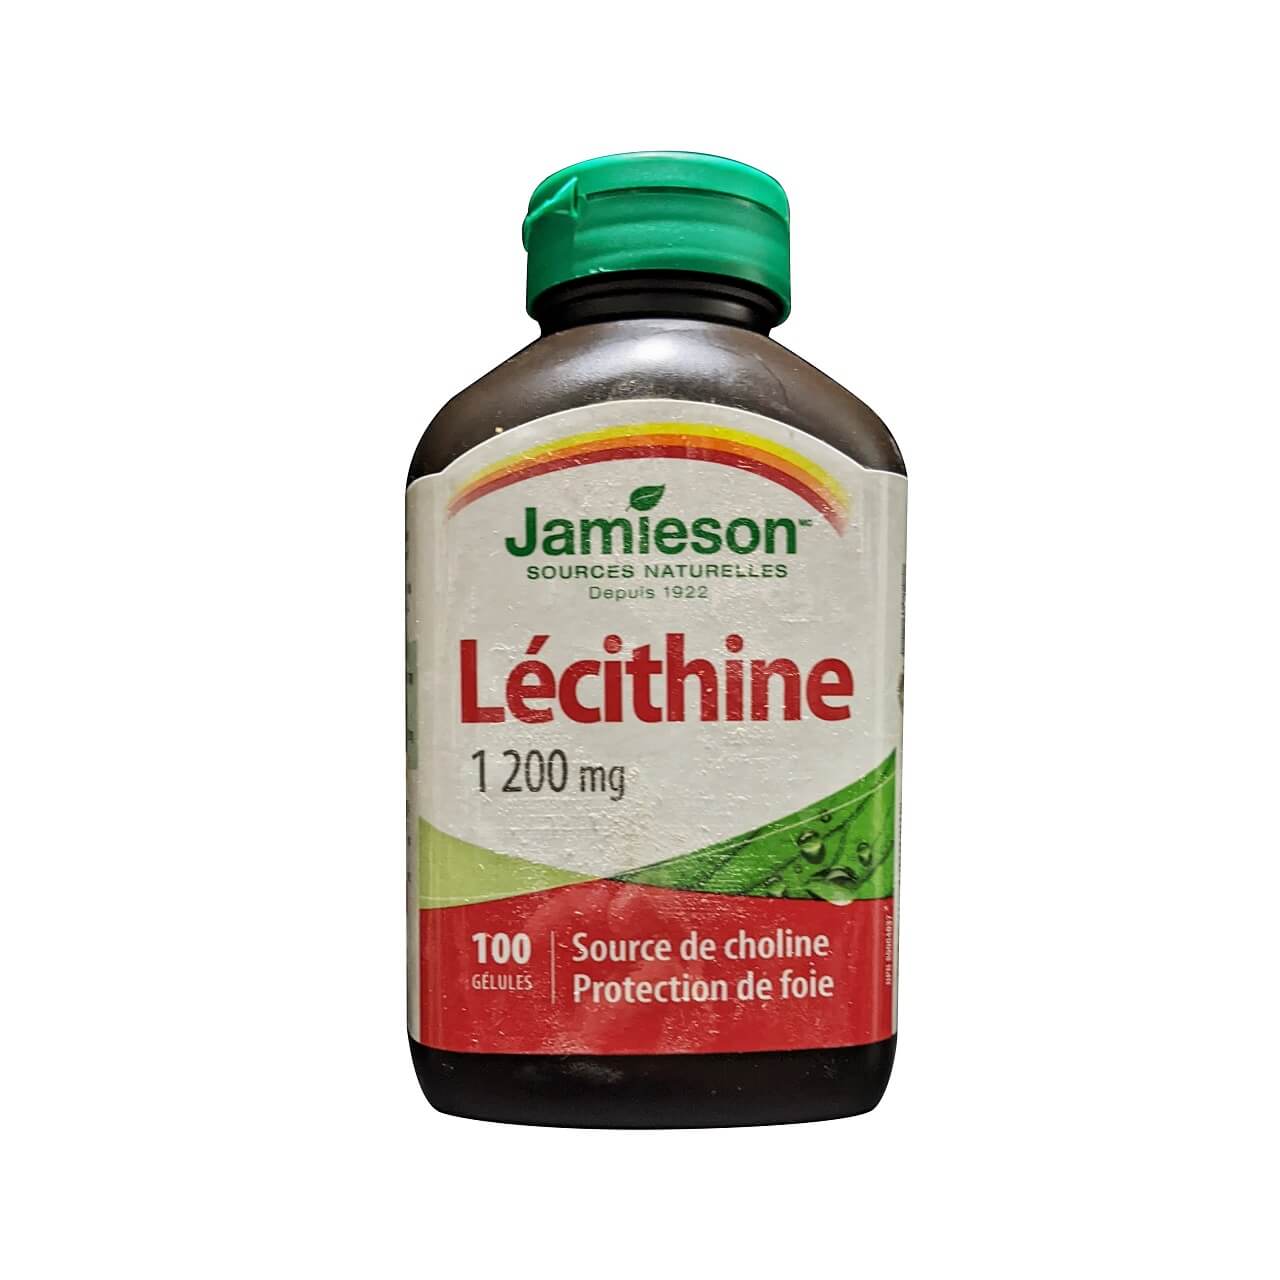 Product label for Jamieson Lecithin 1200 mg (100 softgels) in French